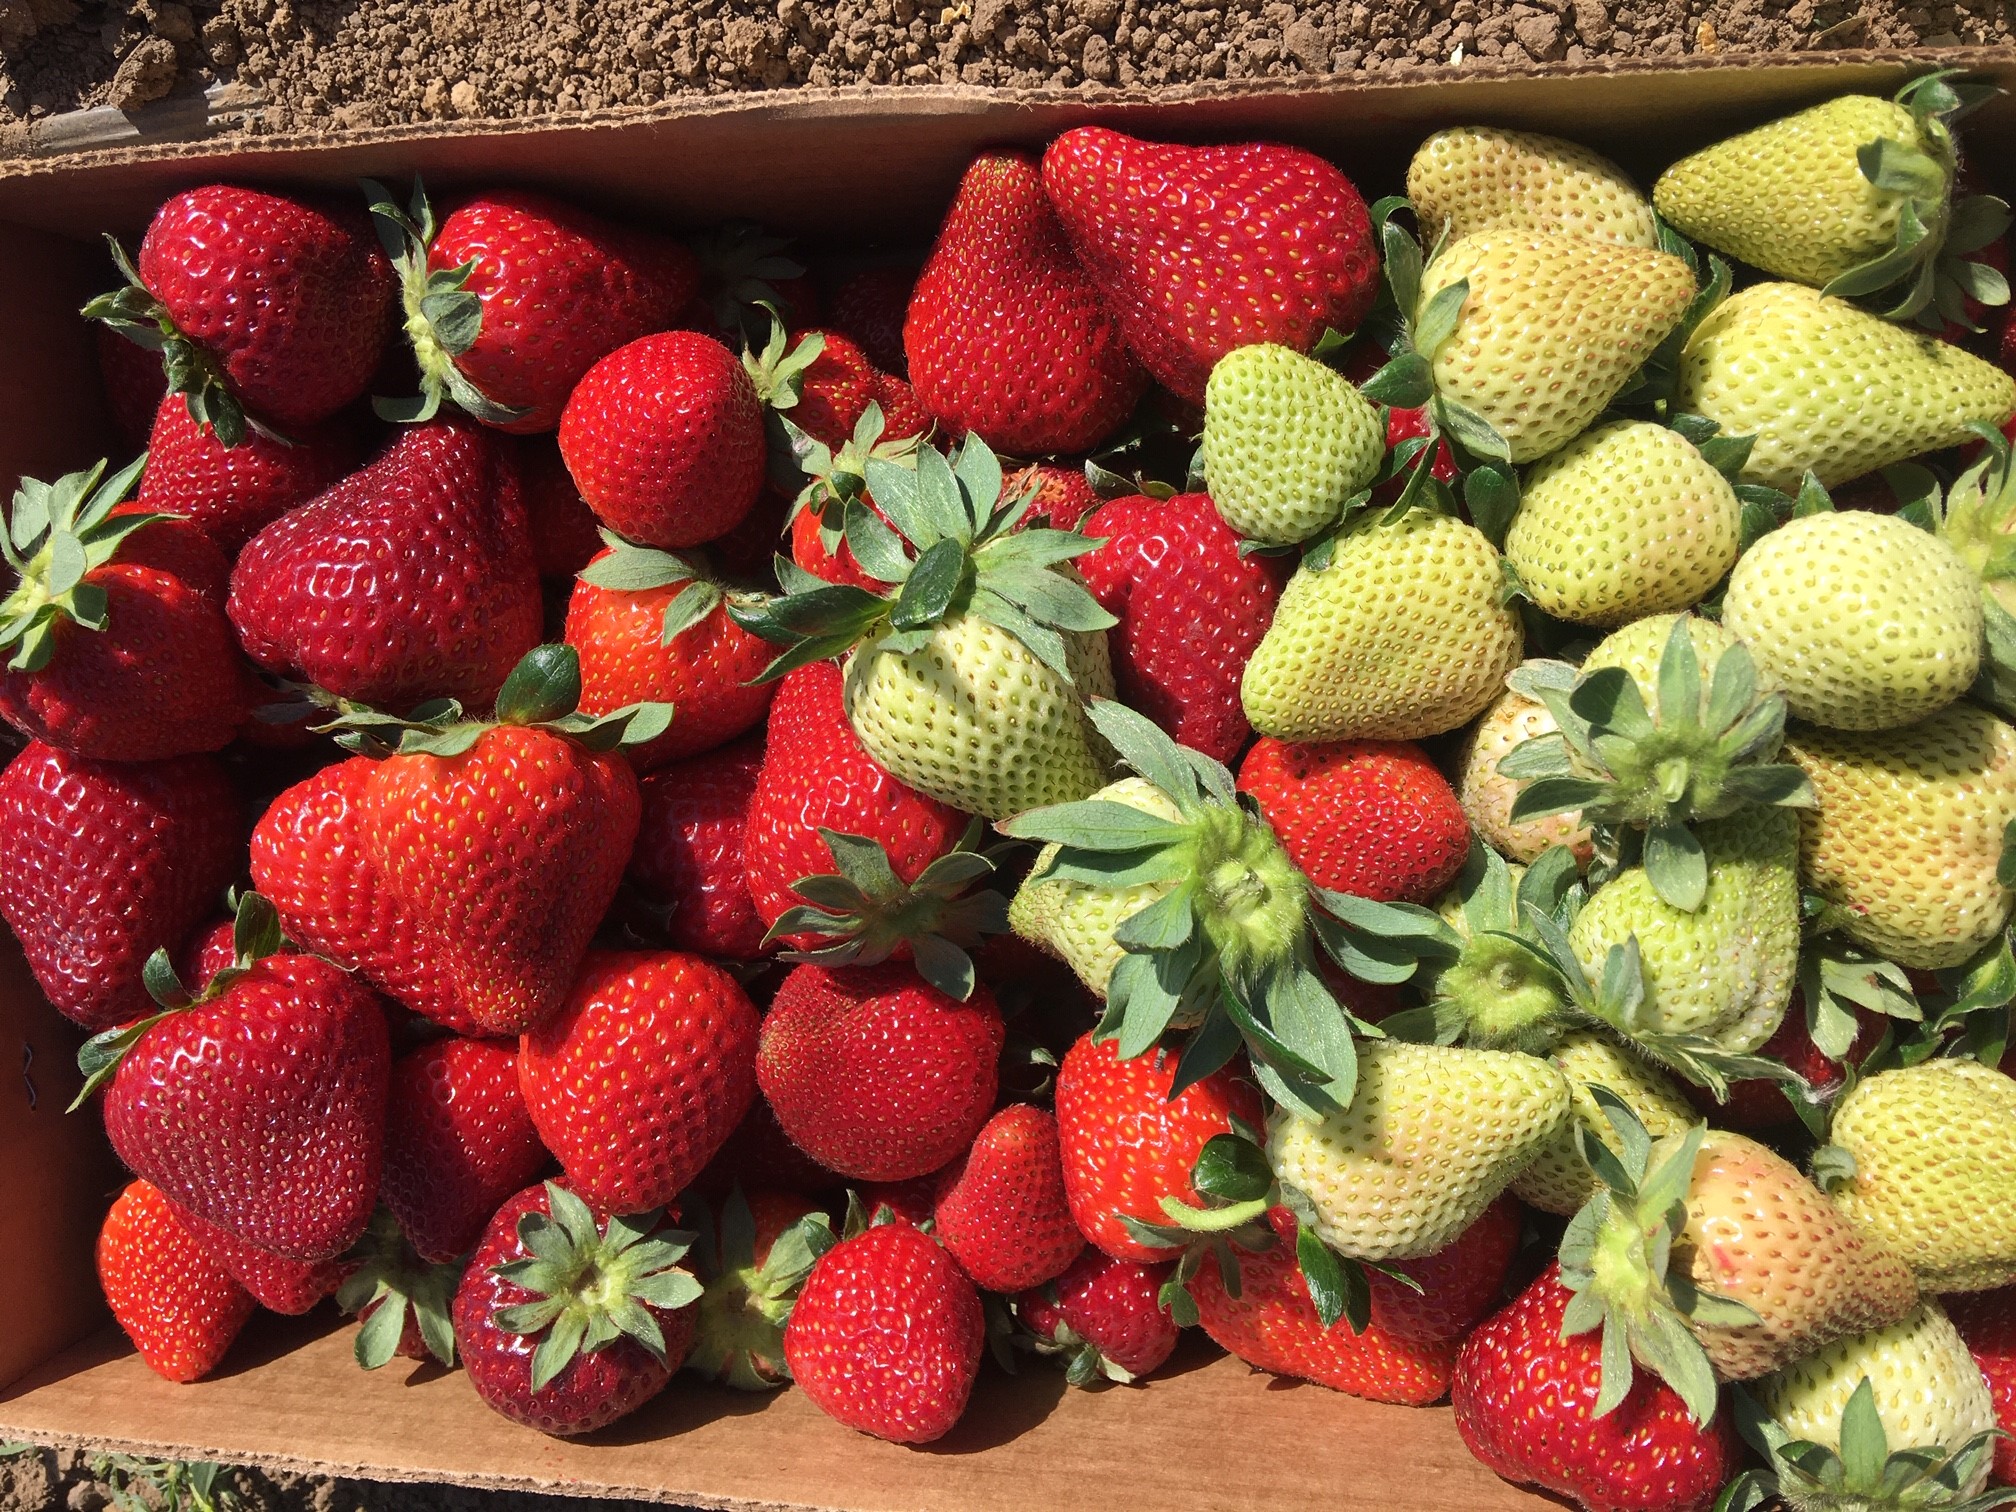 Local Brentwood strawberries